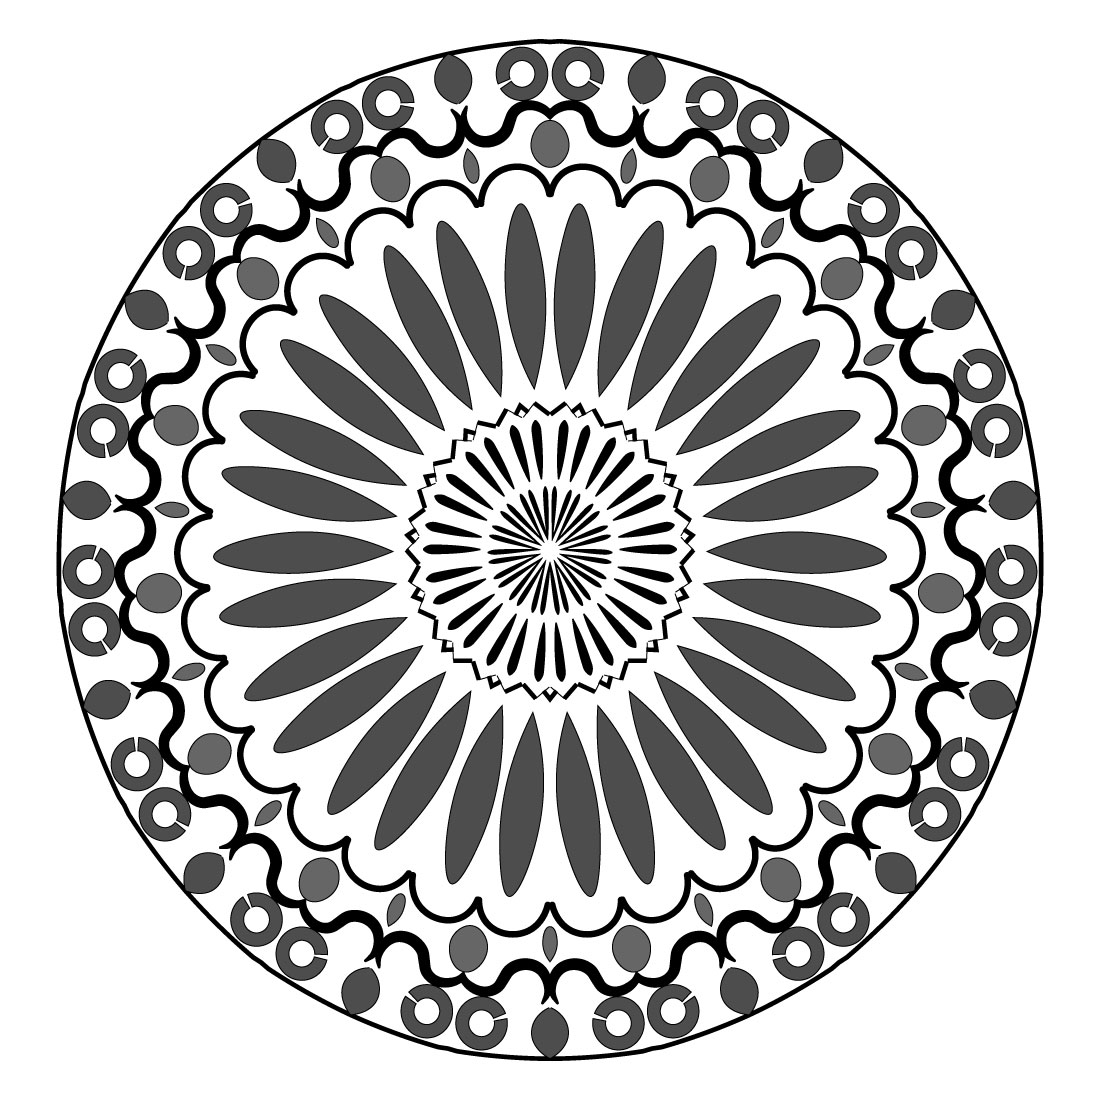 Mandala art with black and white rounded circles preview image.